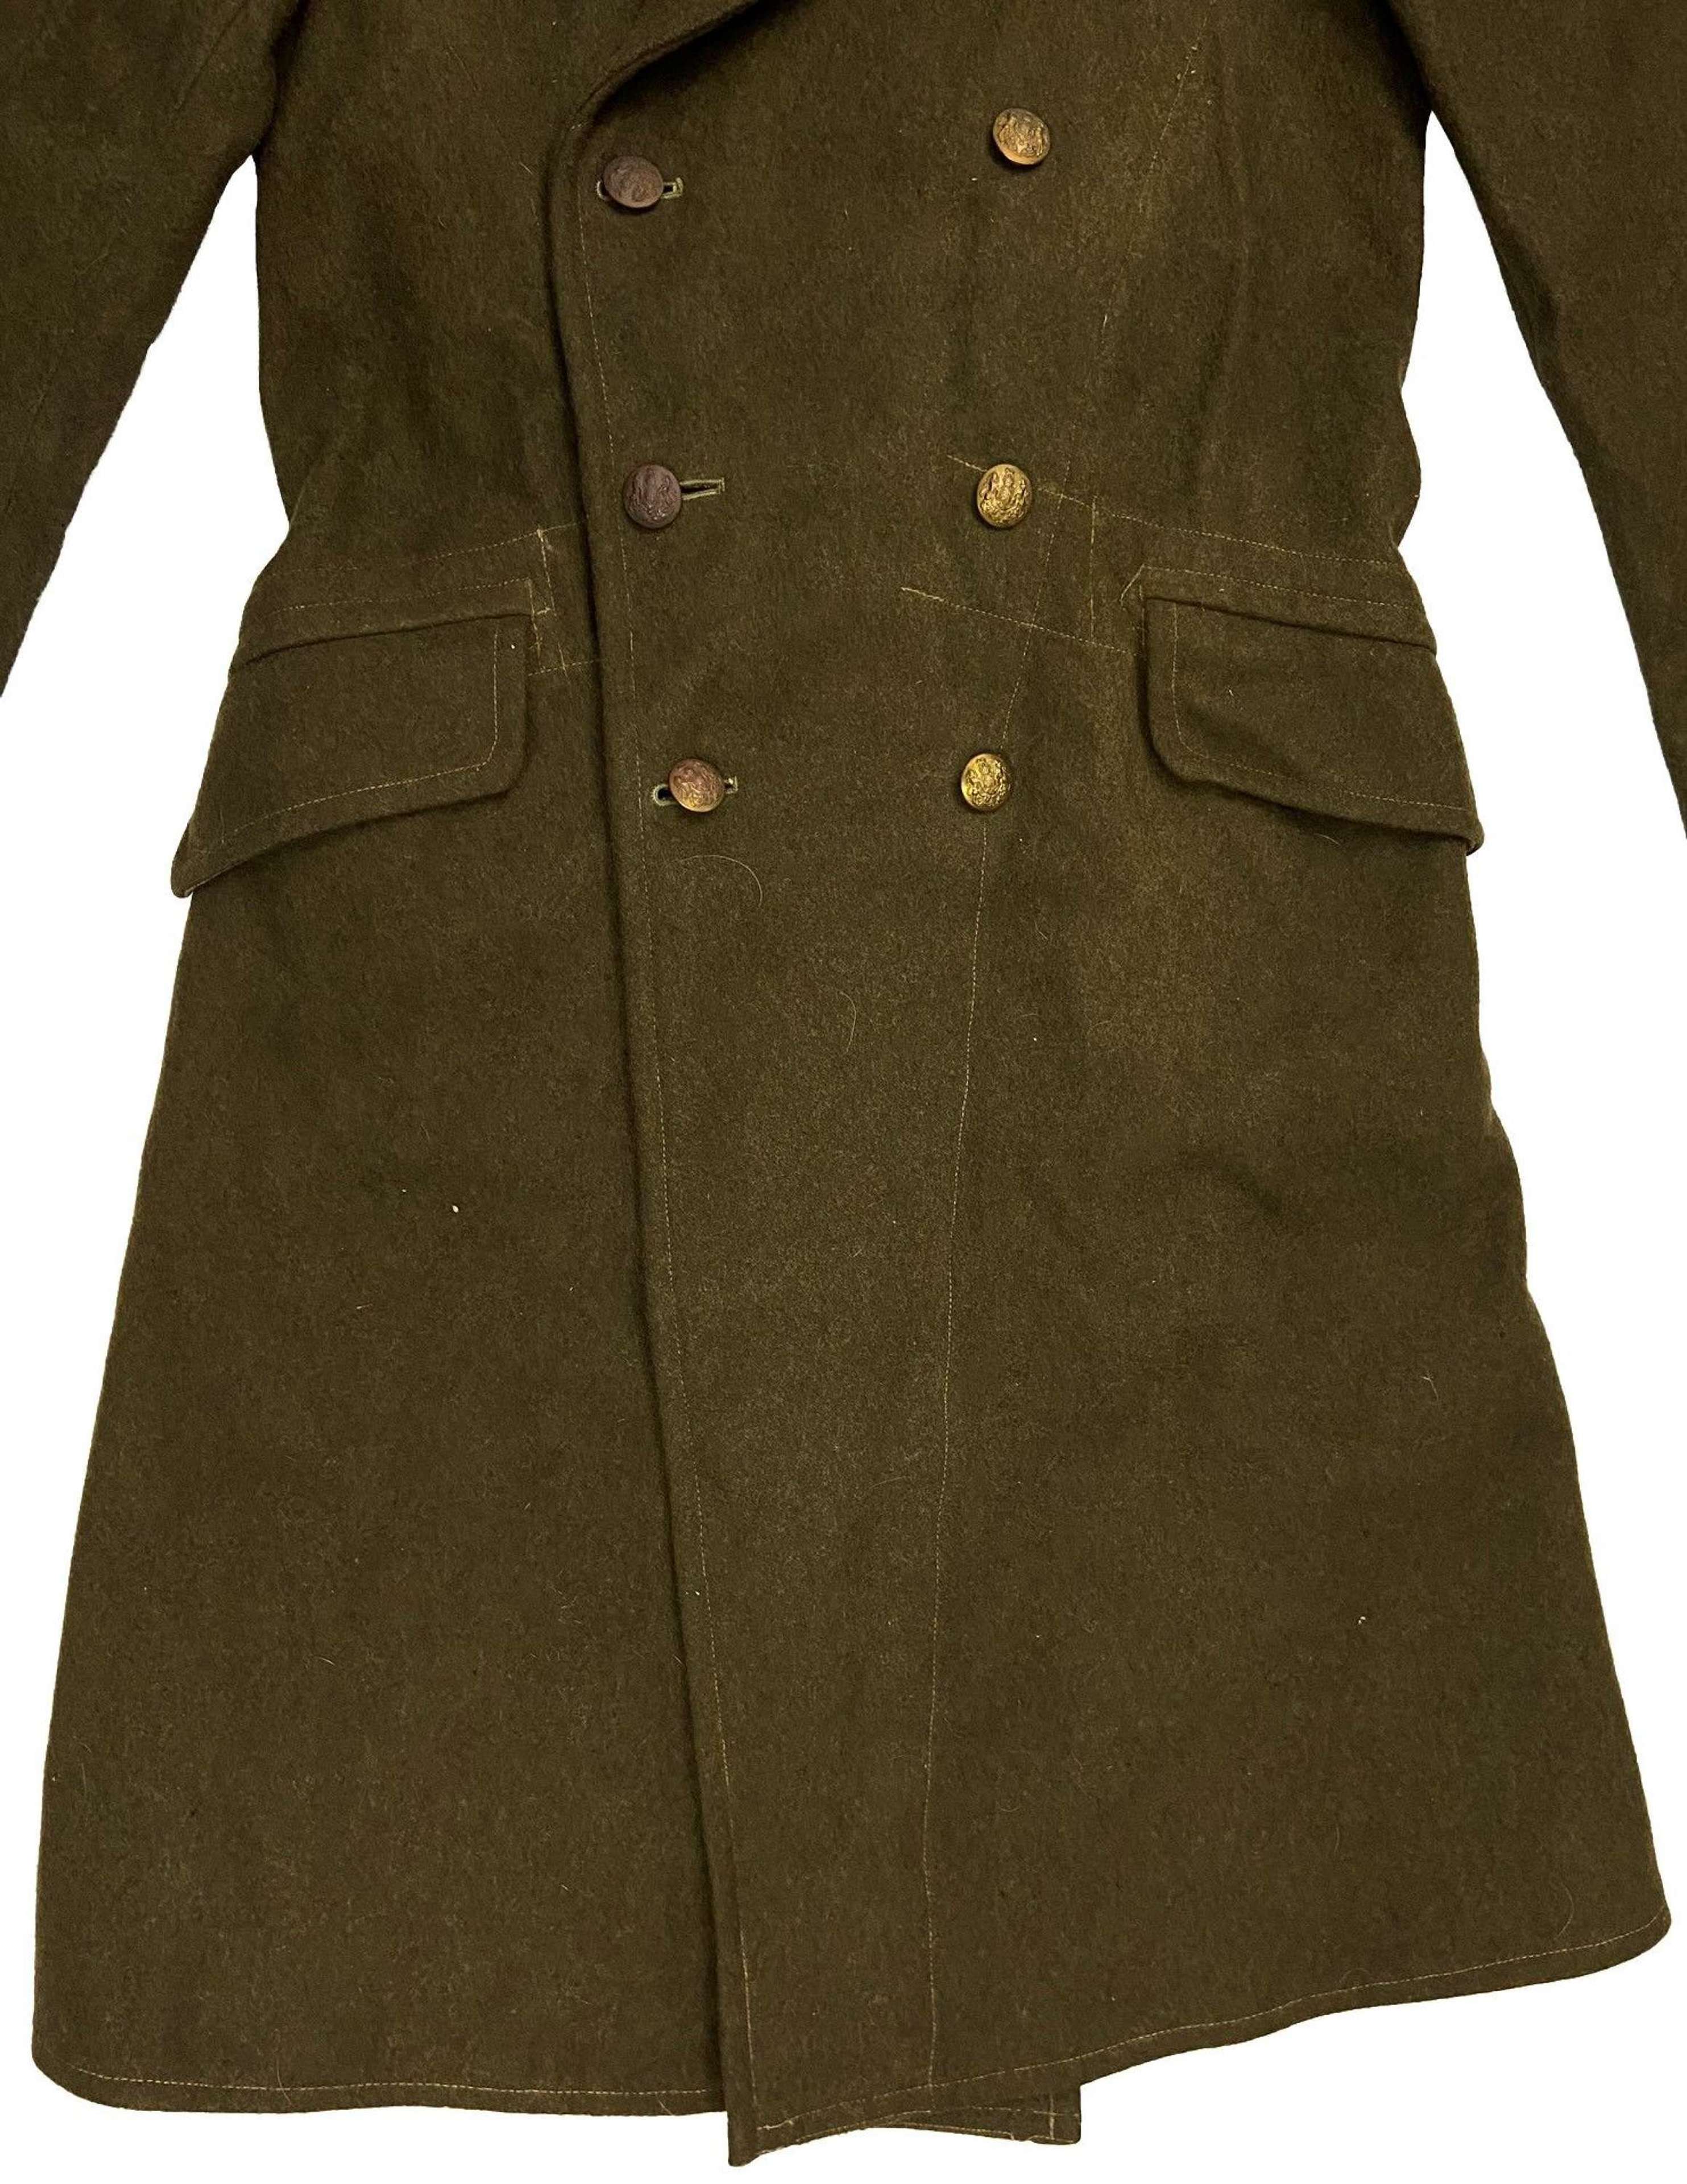 Original 1951 Dated 1940 Pattern Dismounted British Army Greatcoat